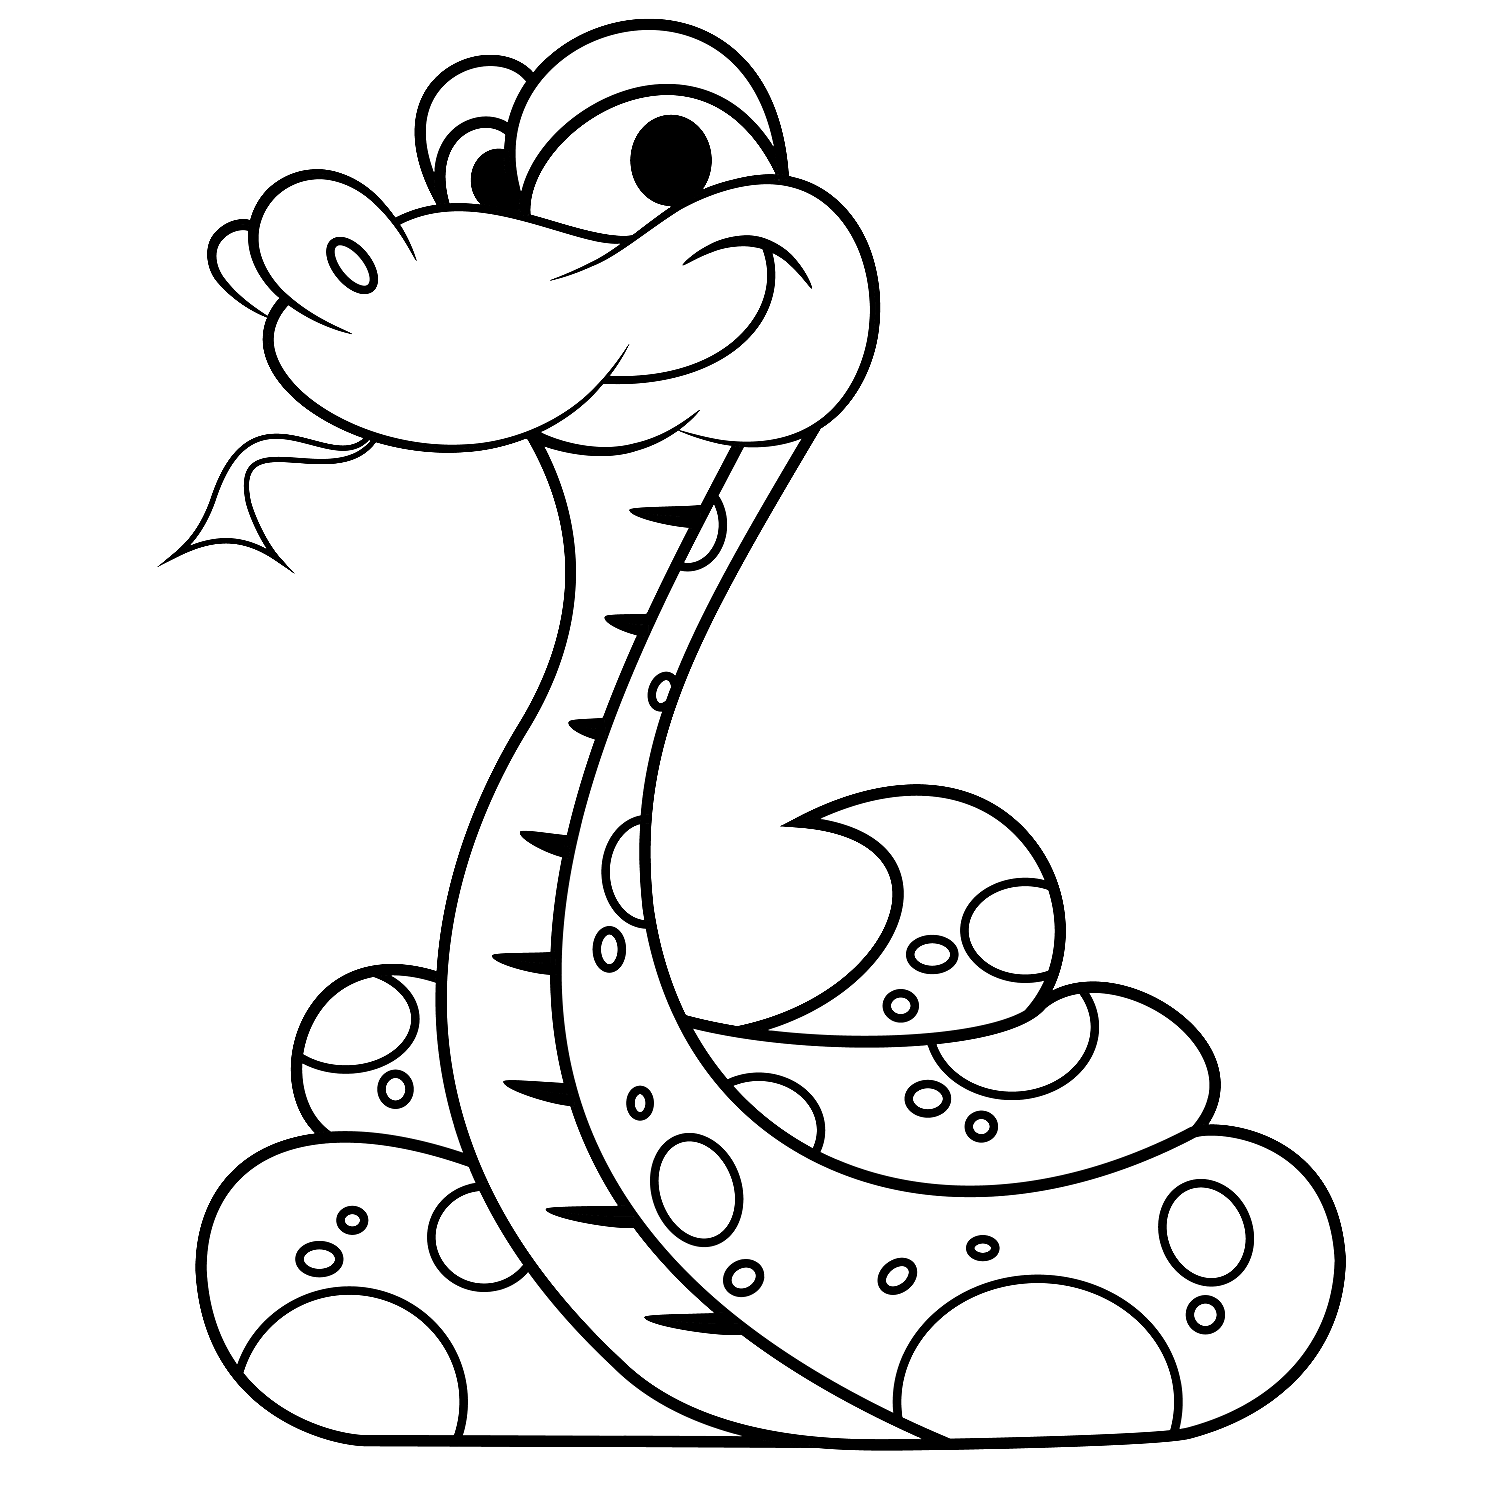 pictures of snakes to color free printable snake coloring pages for kids of pictures to color snakes 